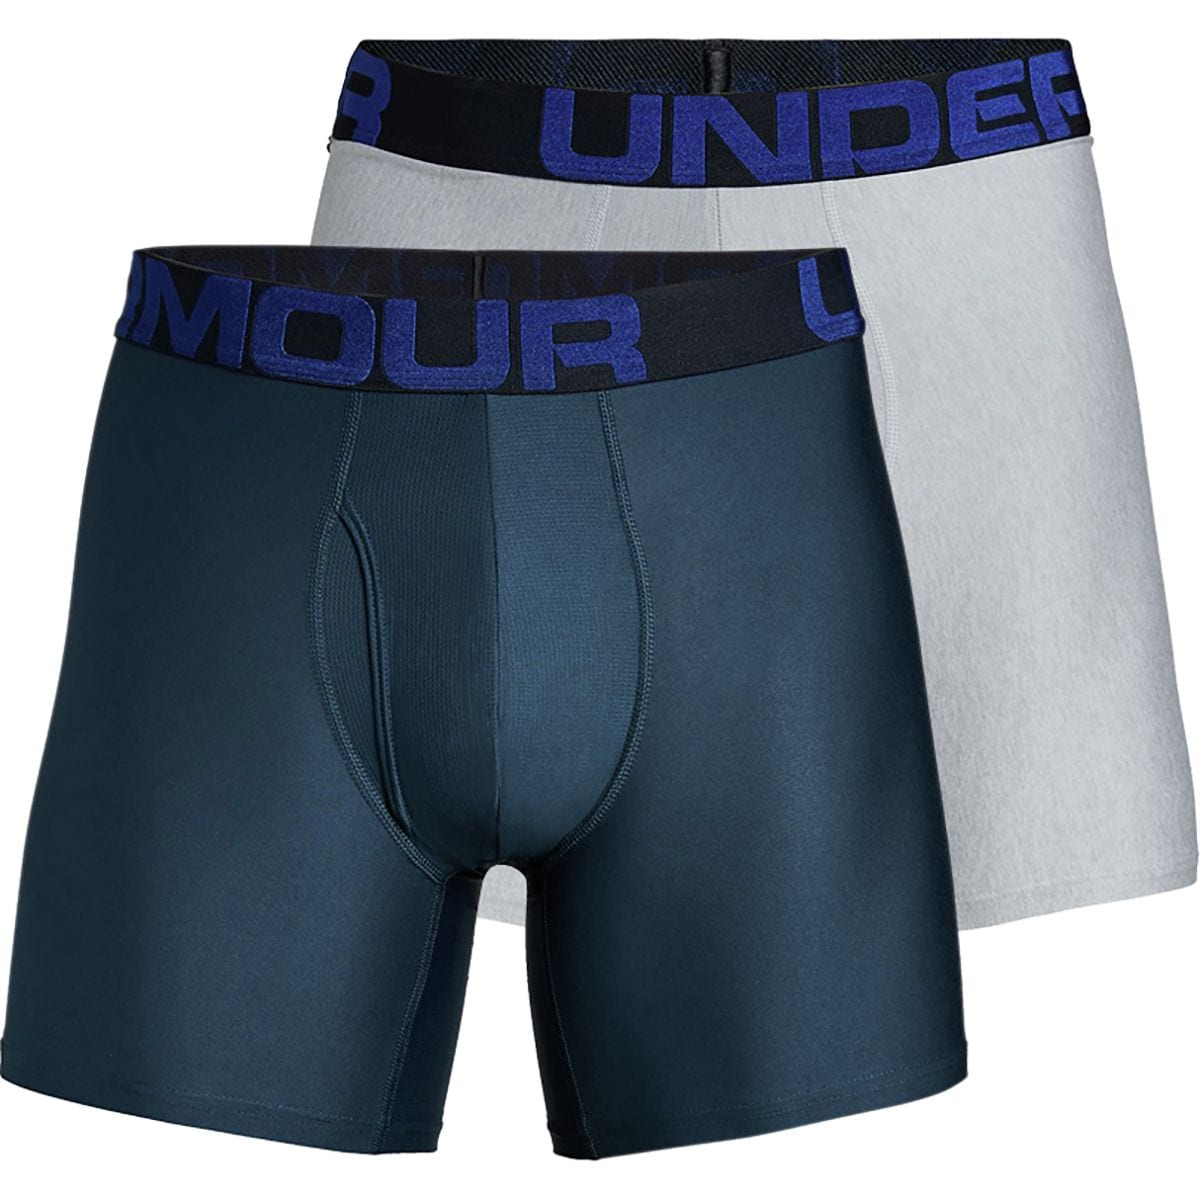 under armour 3 for $35